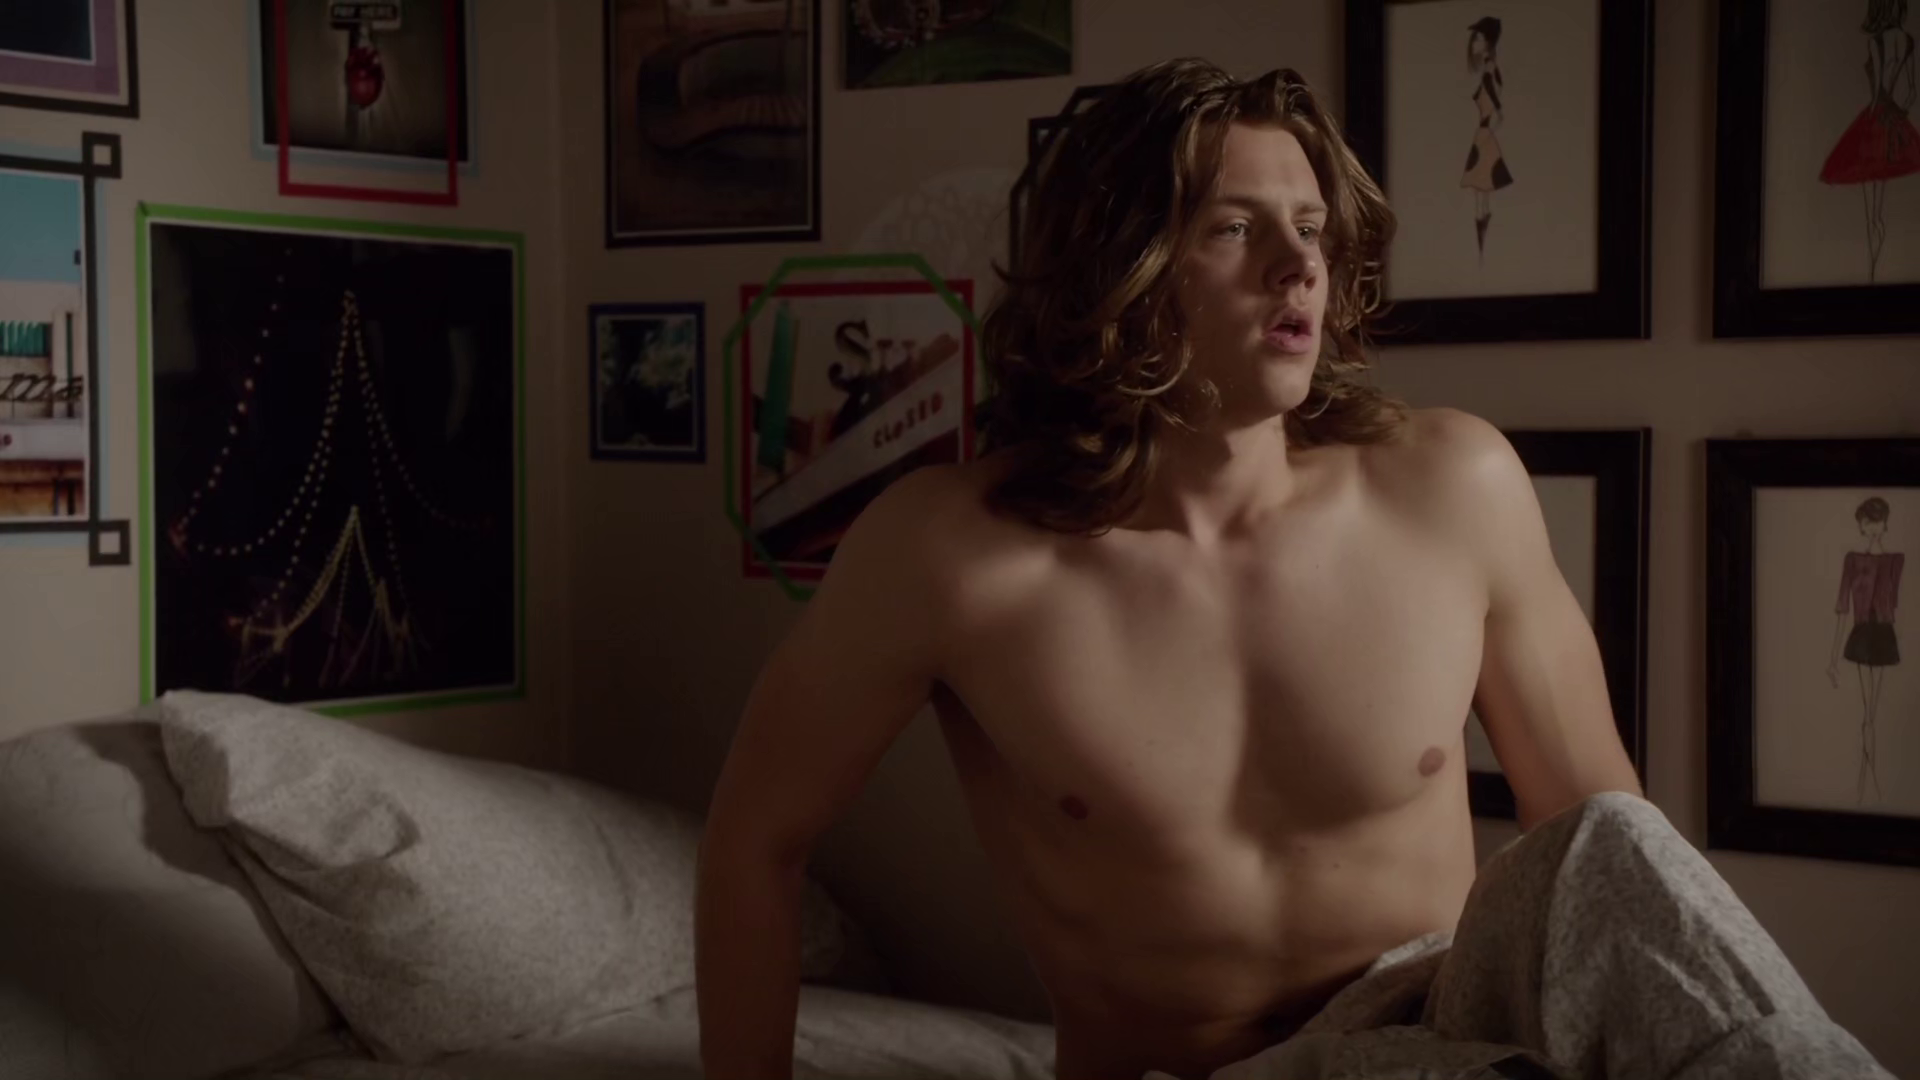 Alex Saxon shirtless in The Fosters 2-05 "Truth Be Told" .